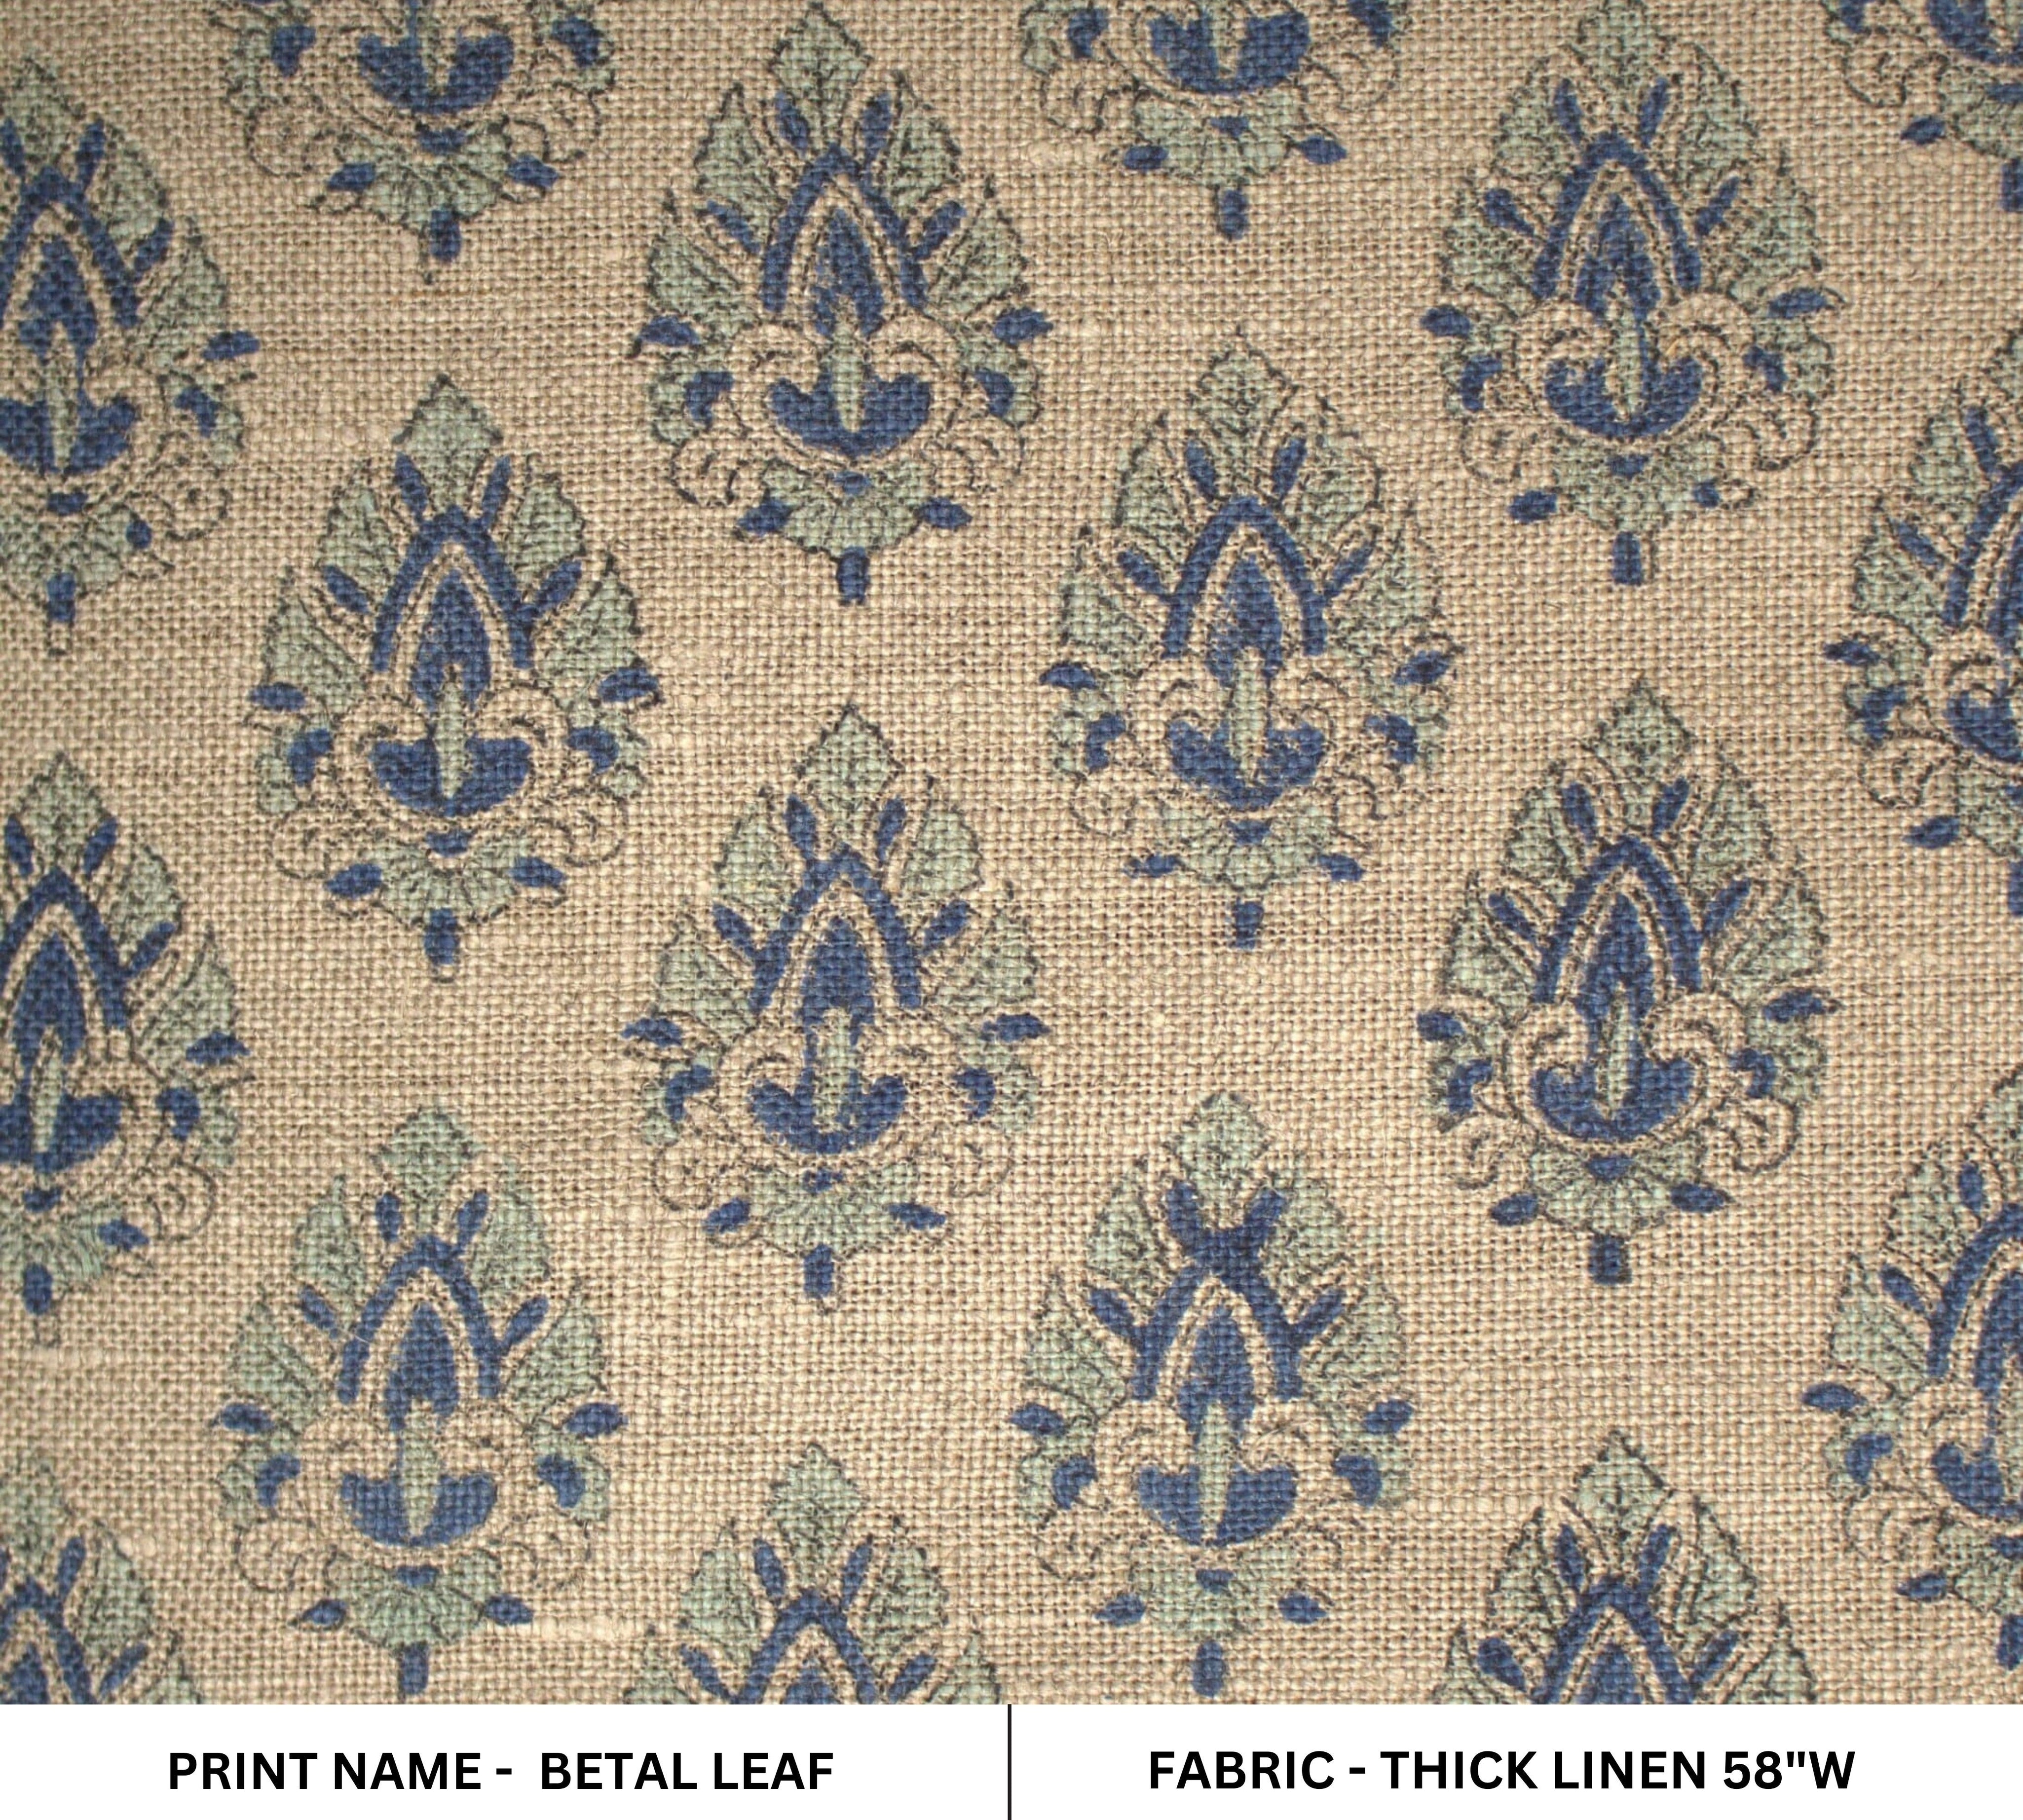 Betel Leaf B  Floral Block Print Fabric, Linen Upholstery Fabric, Fabric For Pillow Covers